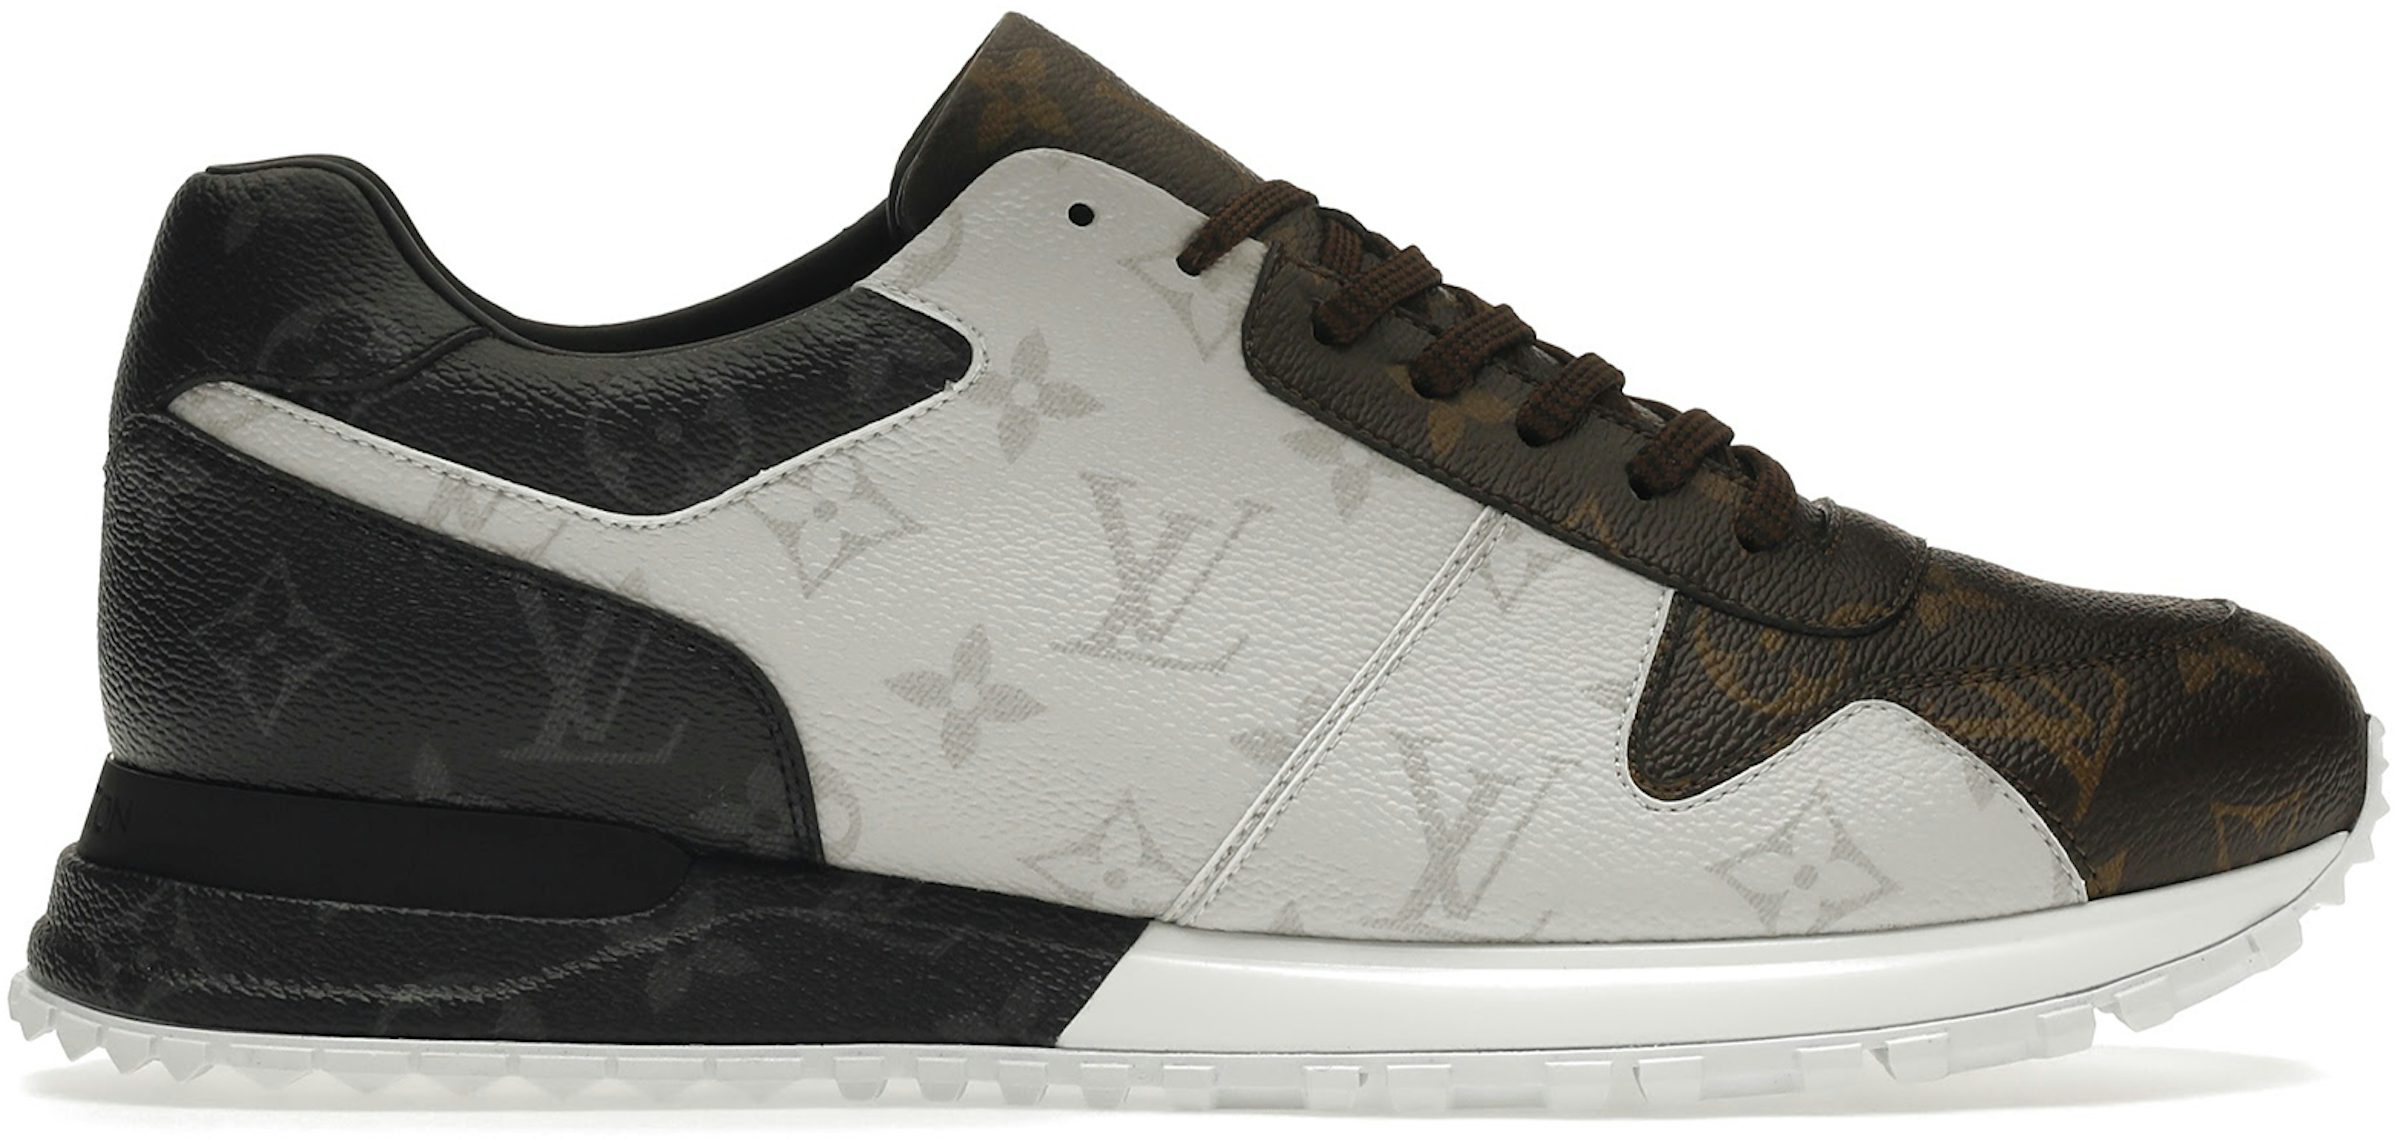 Louis Vuitton Presents a New Iconic Sneaker, the LV Runner Tatic